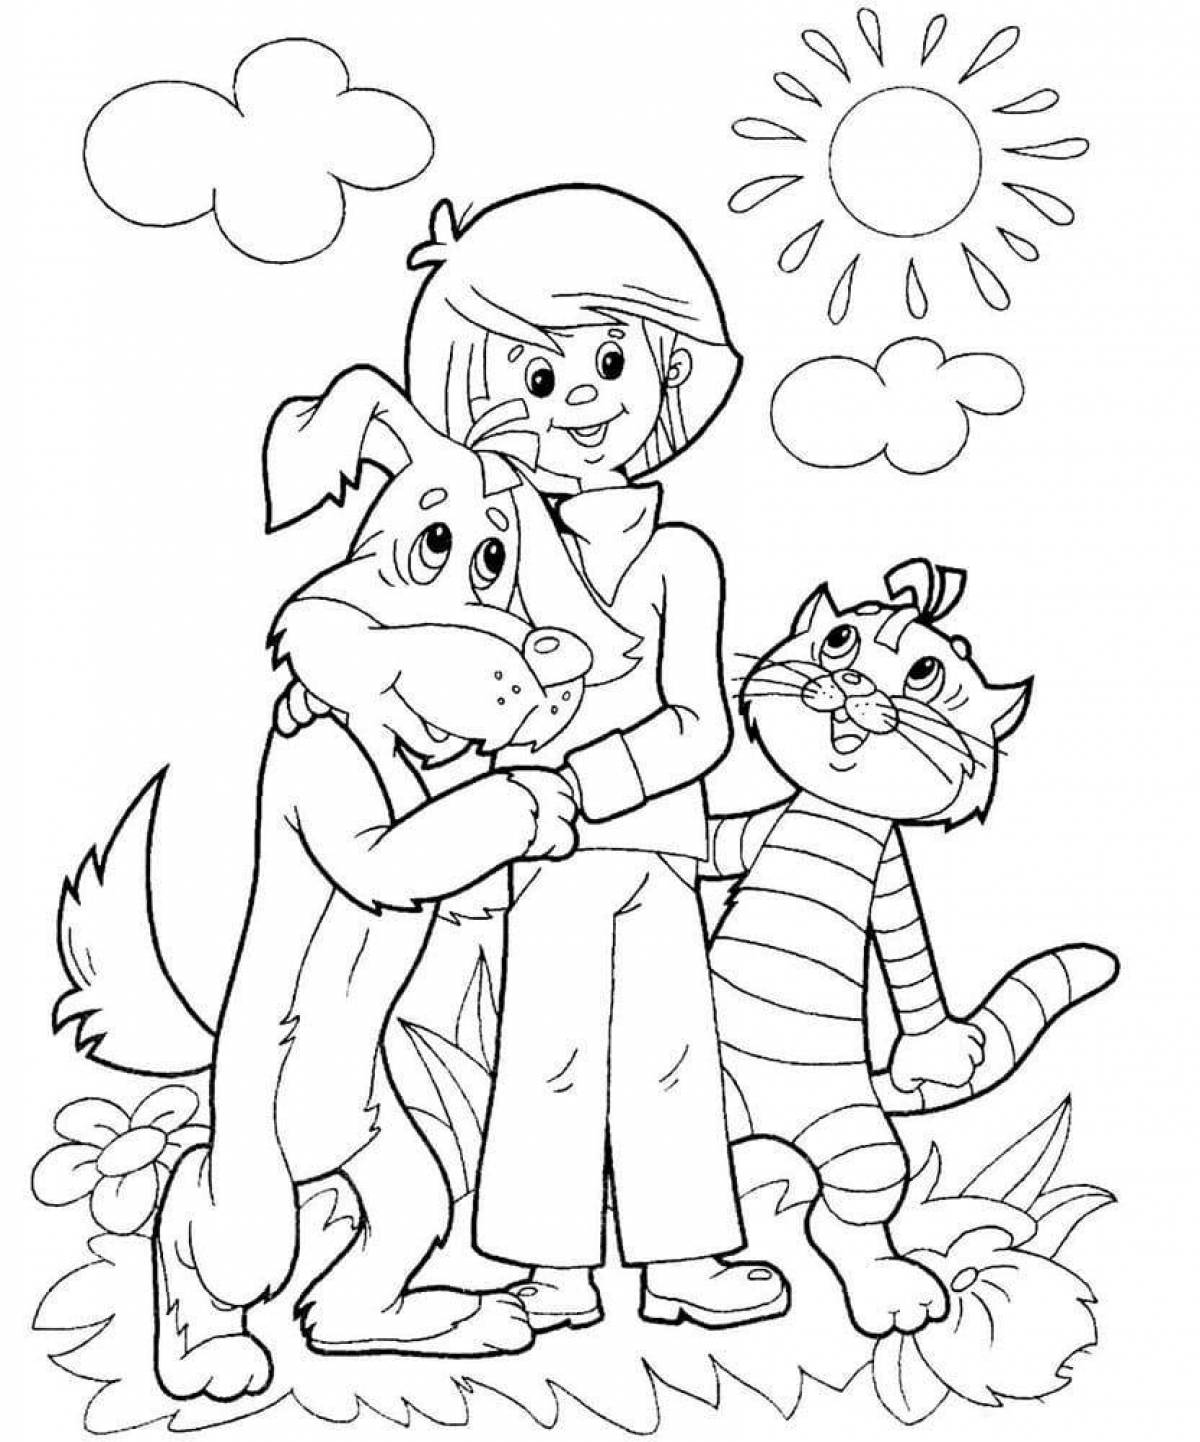 Adorable Pechkin Postman Coloring Pages for Babies